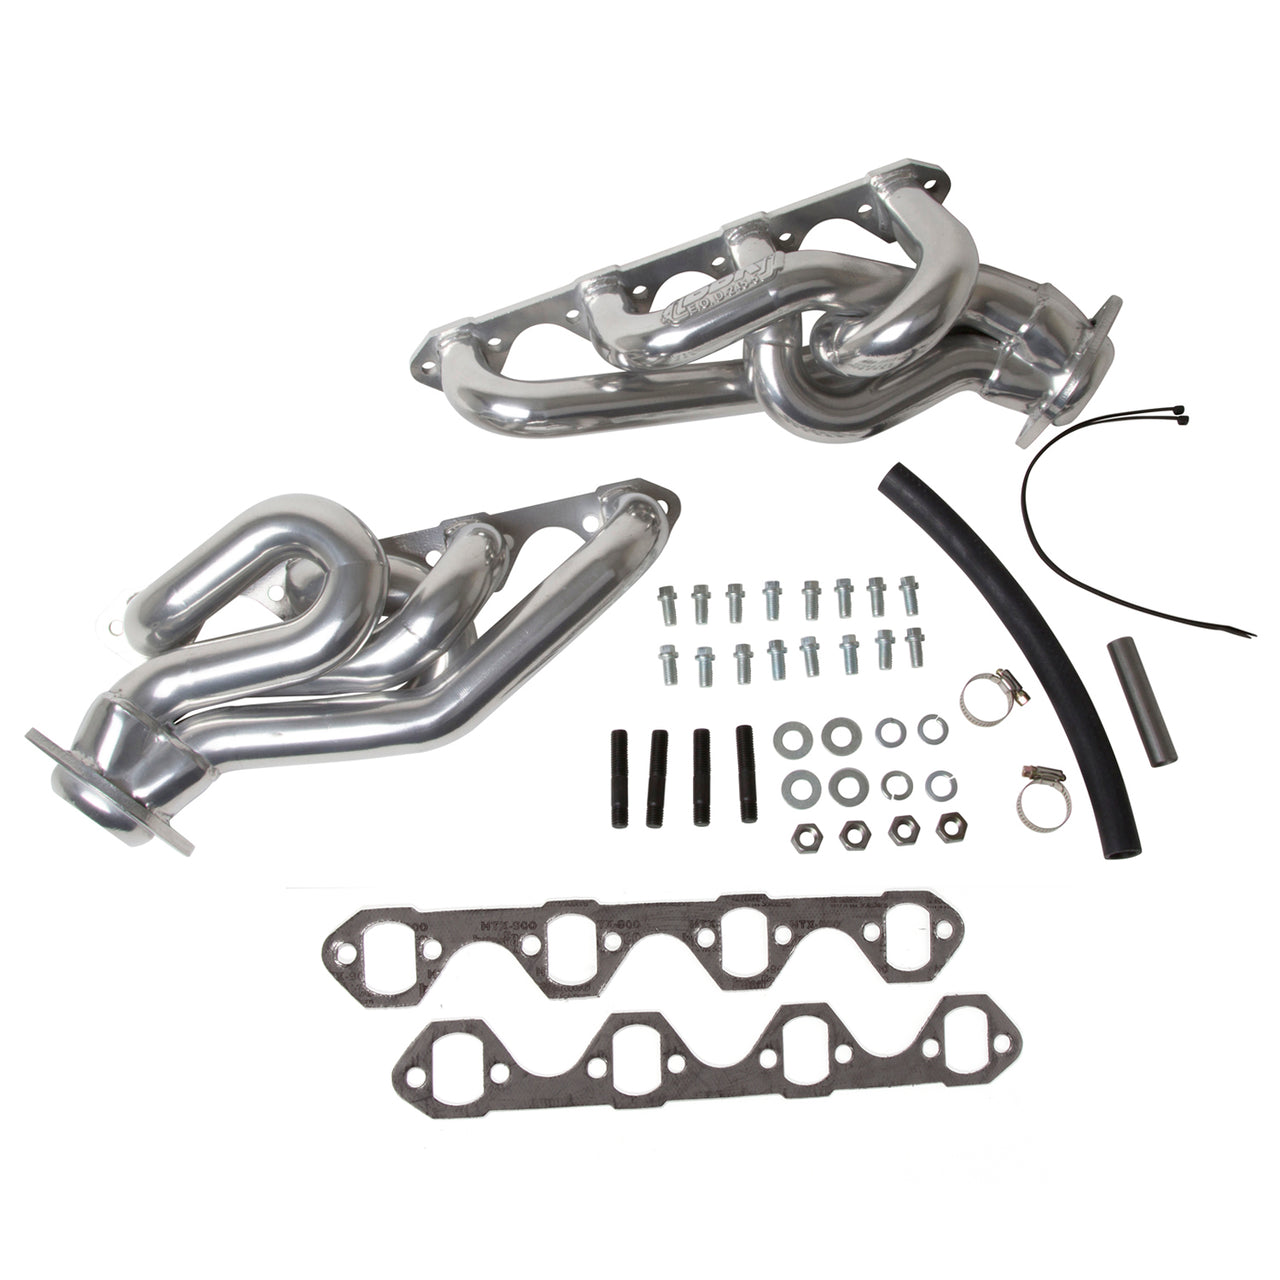 1986-1993 MUSTANG 5.0L 1-5/8 SHORTY EQUAL LENGTH HEADERS (POLISHED SILVER CERAMIC)